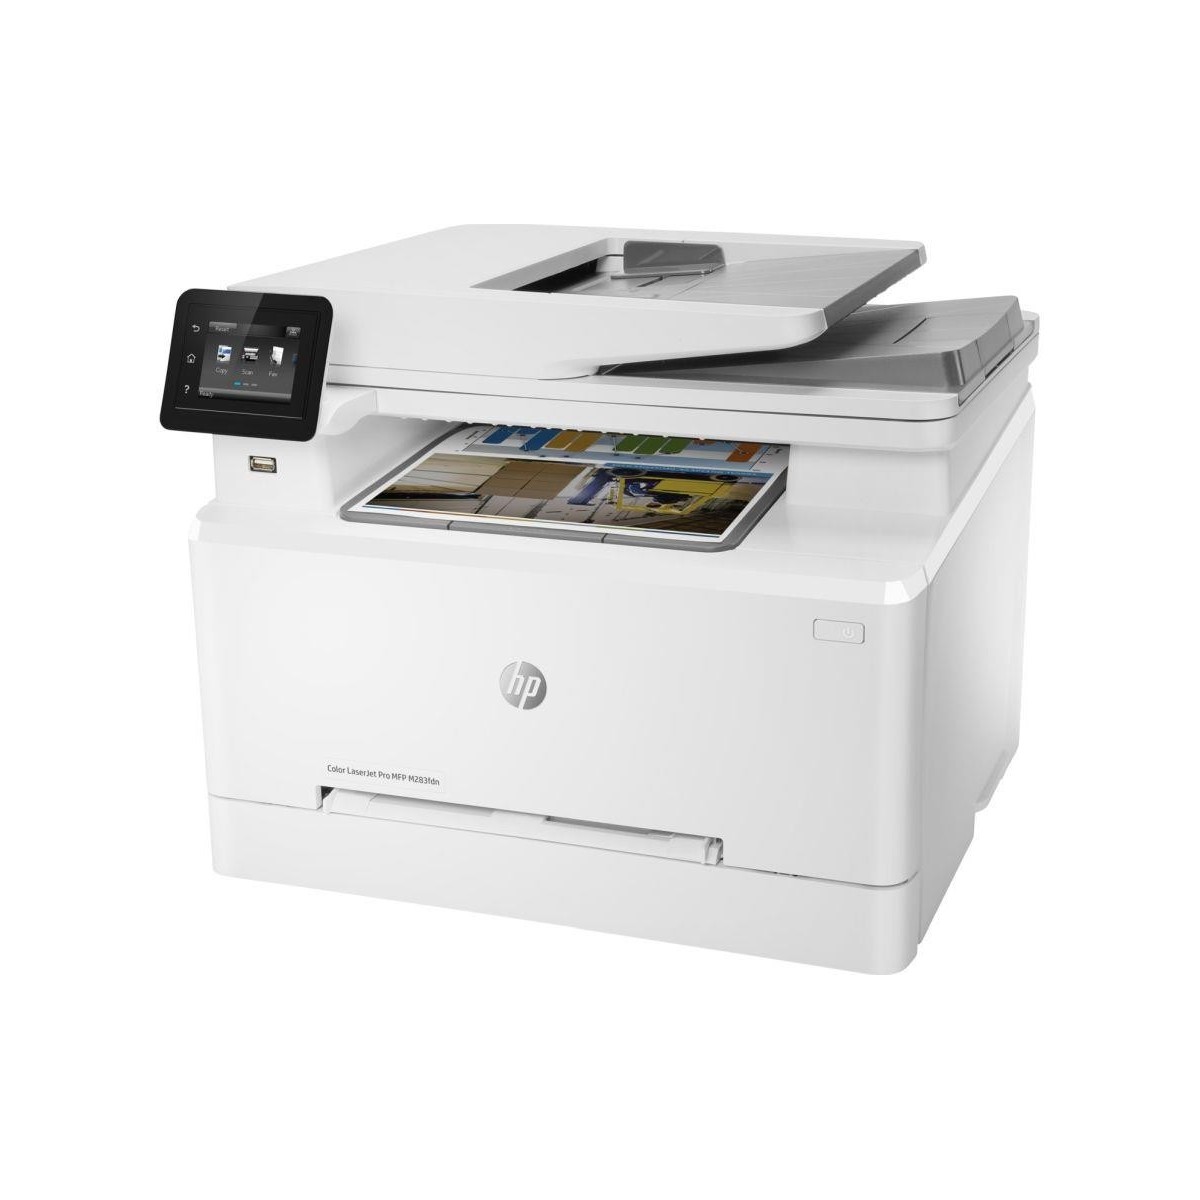 HP Color LaserJet Pro MFP M283fdn - Print - Copy - Scan - Fax - Front-facing USB printing Scan to email Two-sided printing 50-sh